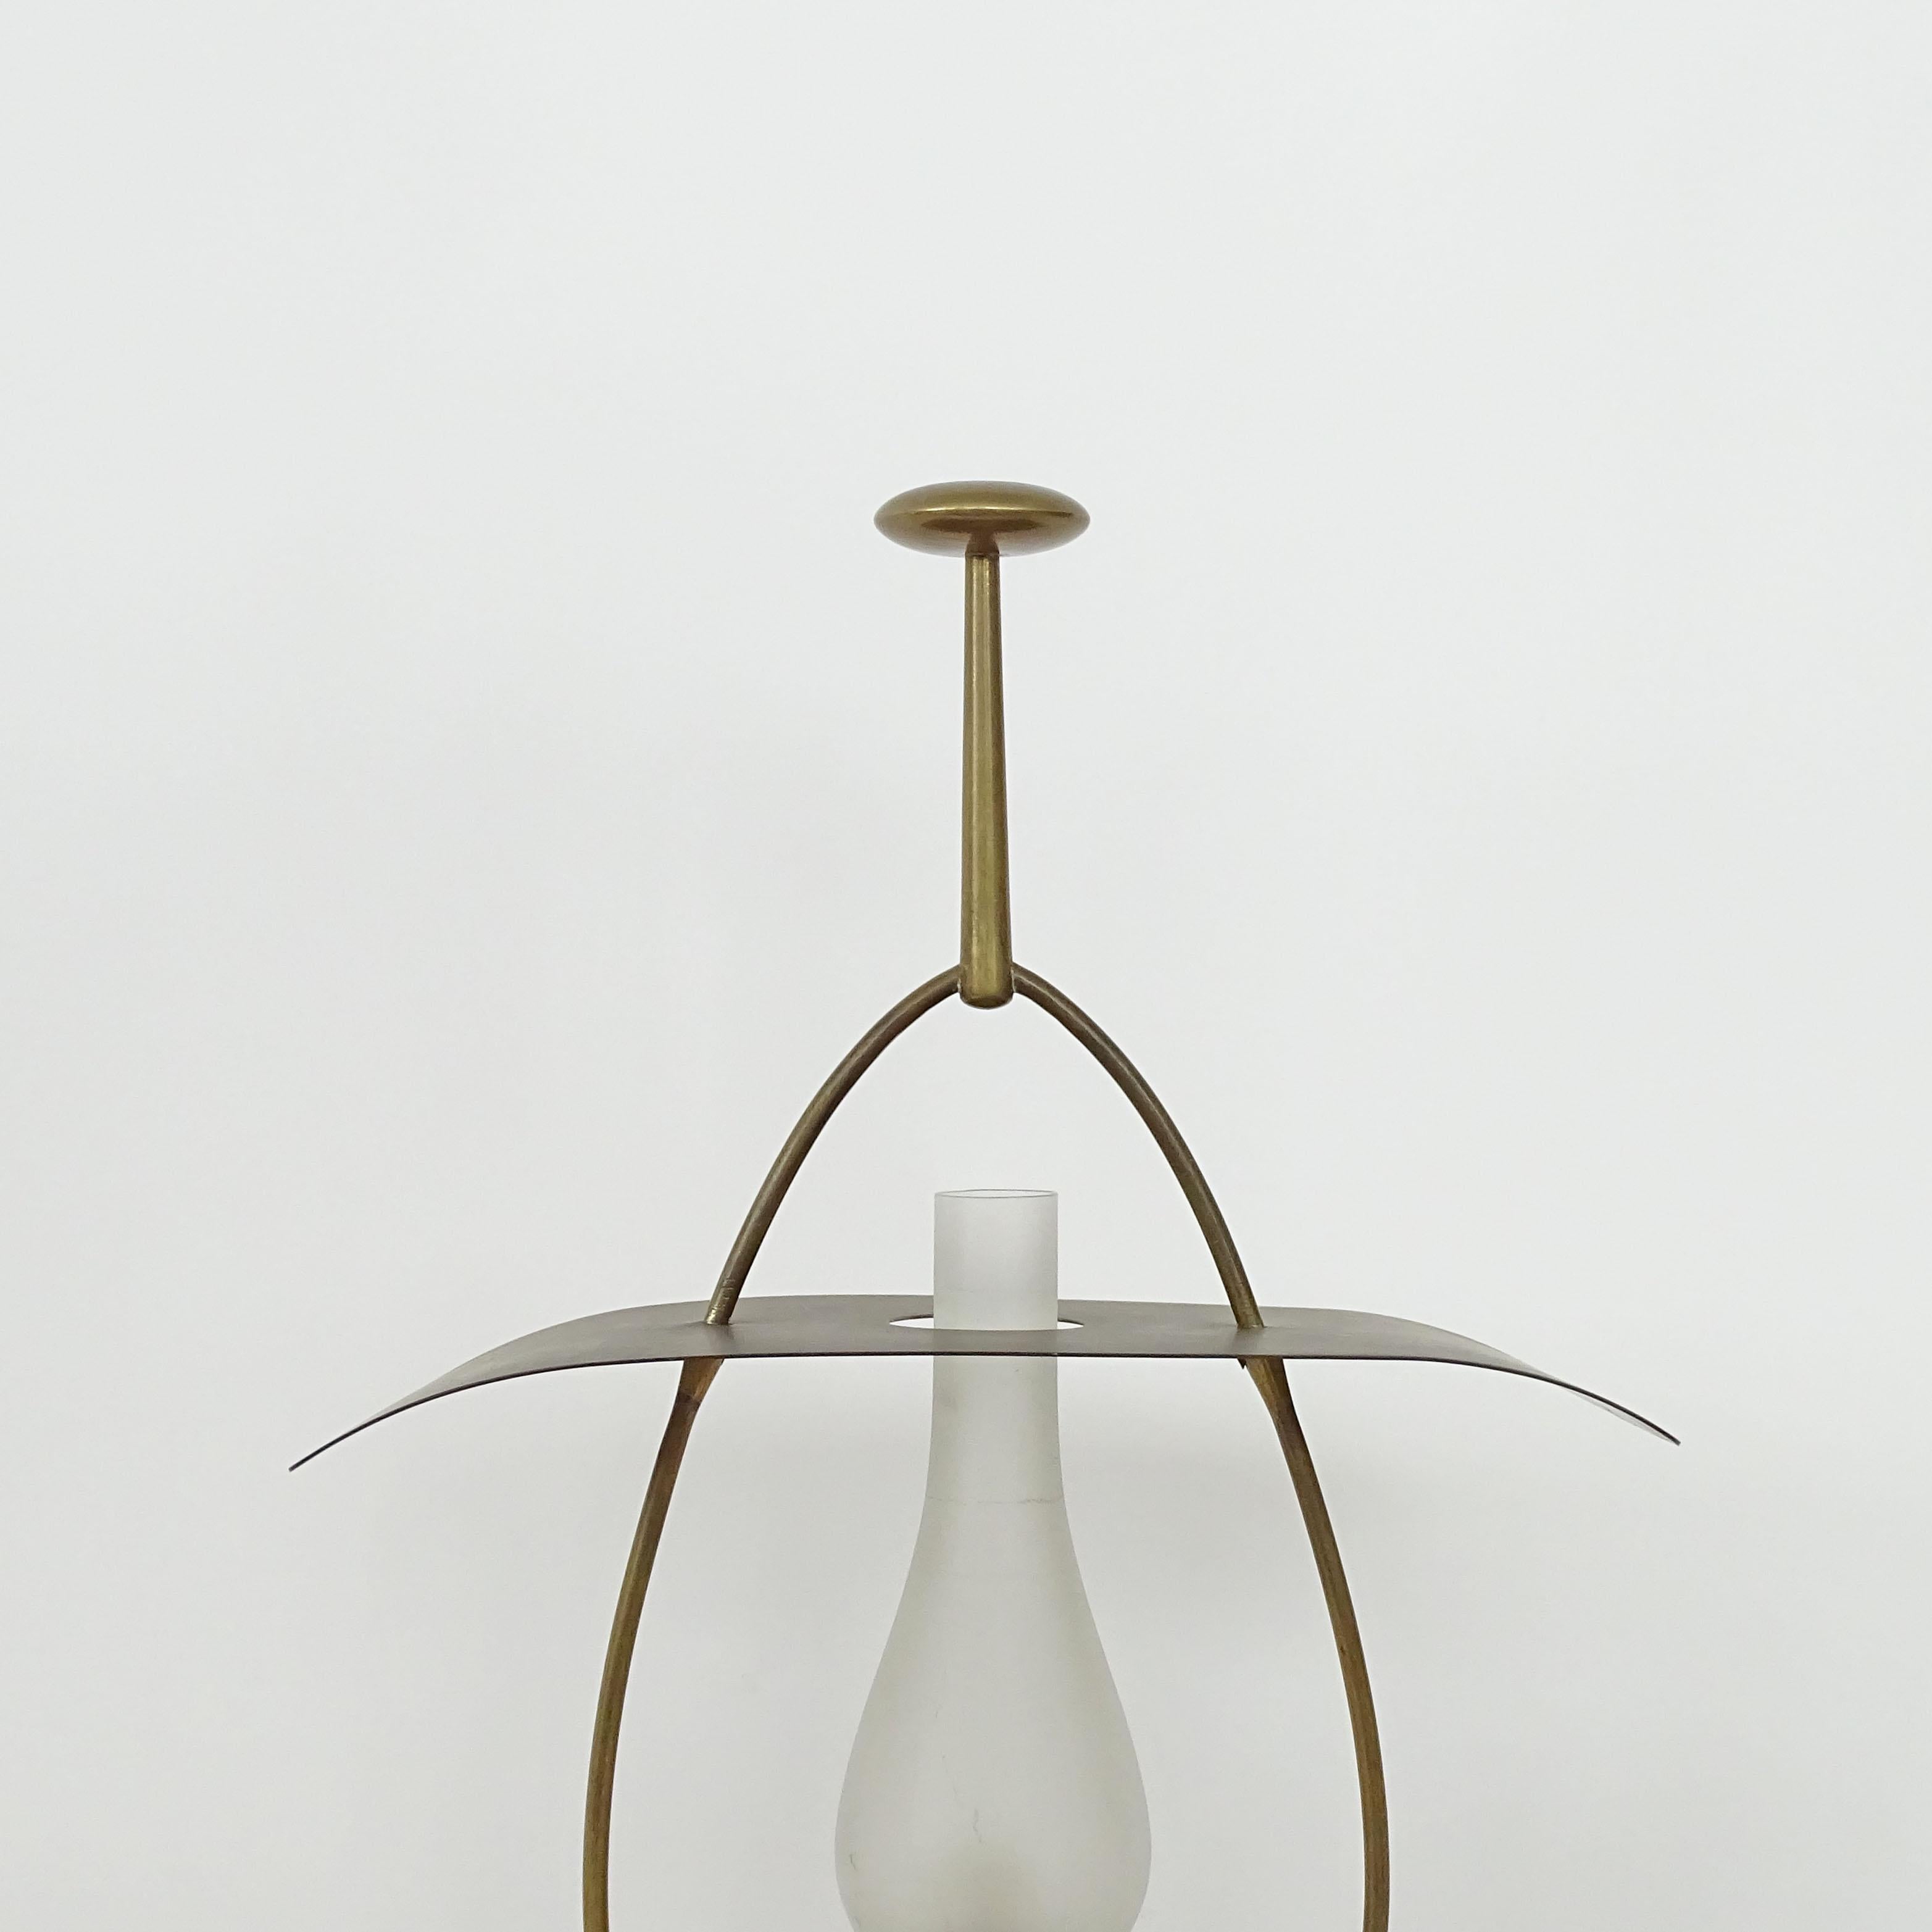 Guglielmo Ulrich Lantern table lamp in Brass for Scaglia Milano, Italy 1939
Reference: Domus No. 133 January 1939 p. 88.